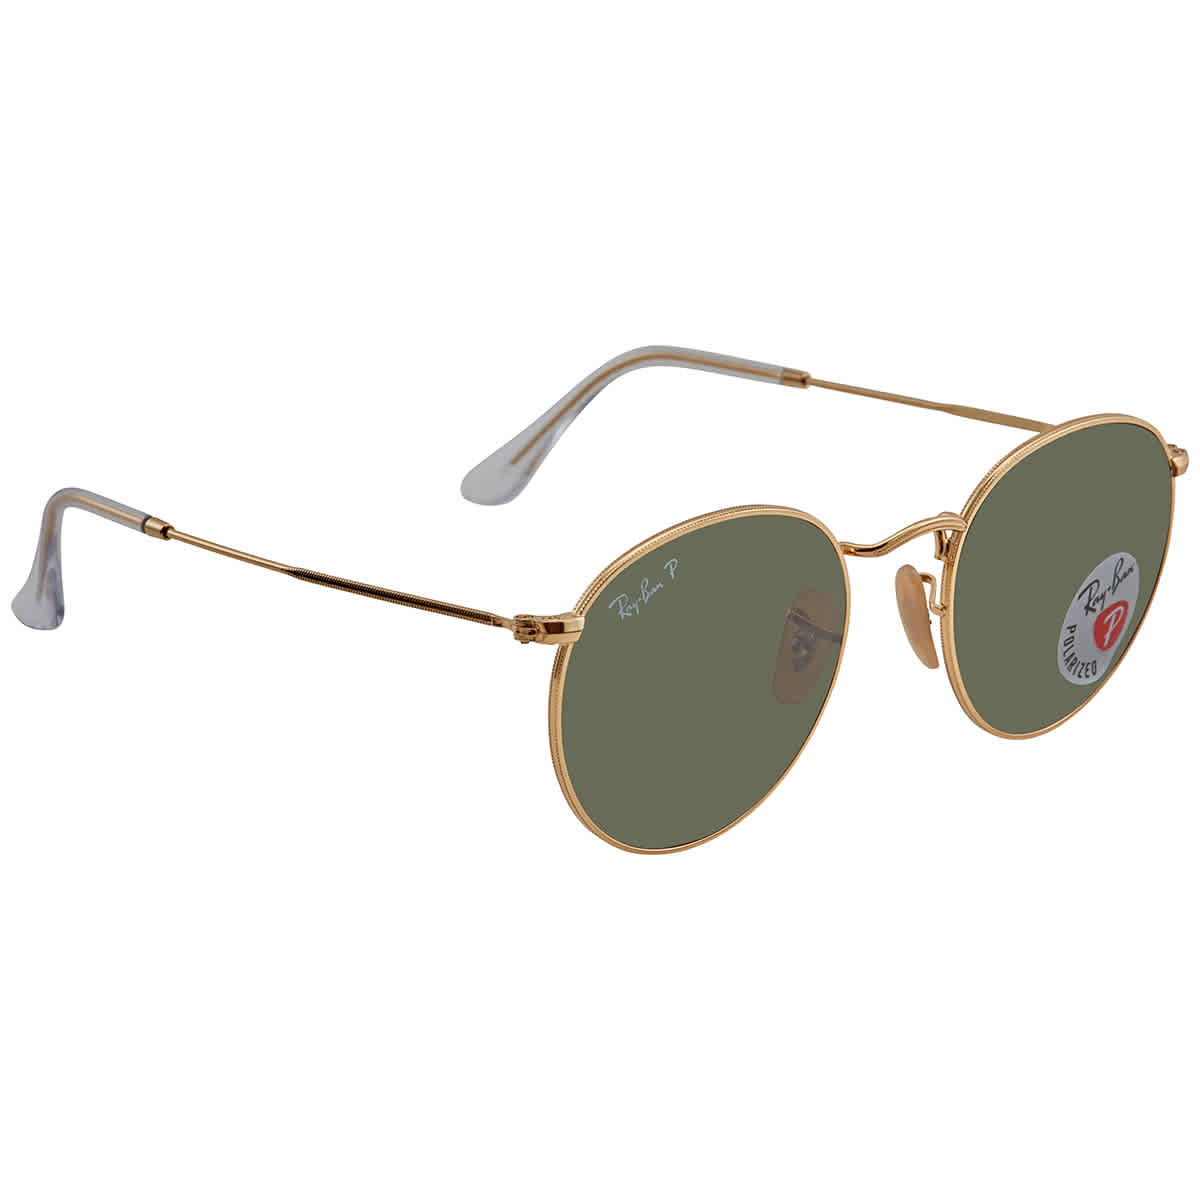 Ray Ban Polarized Green Classic G-15 Round Sunglasses RB3447 001/58 50